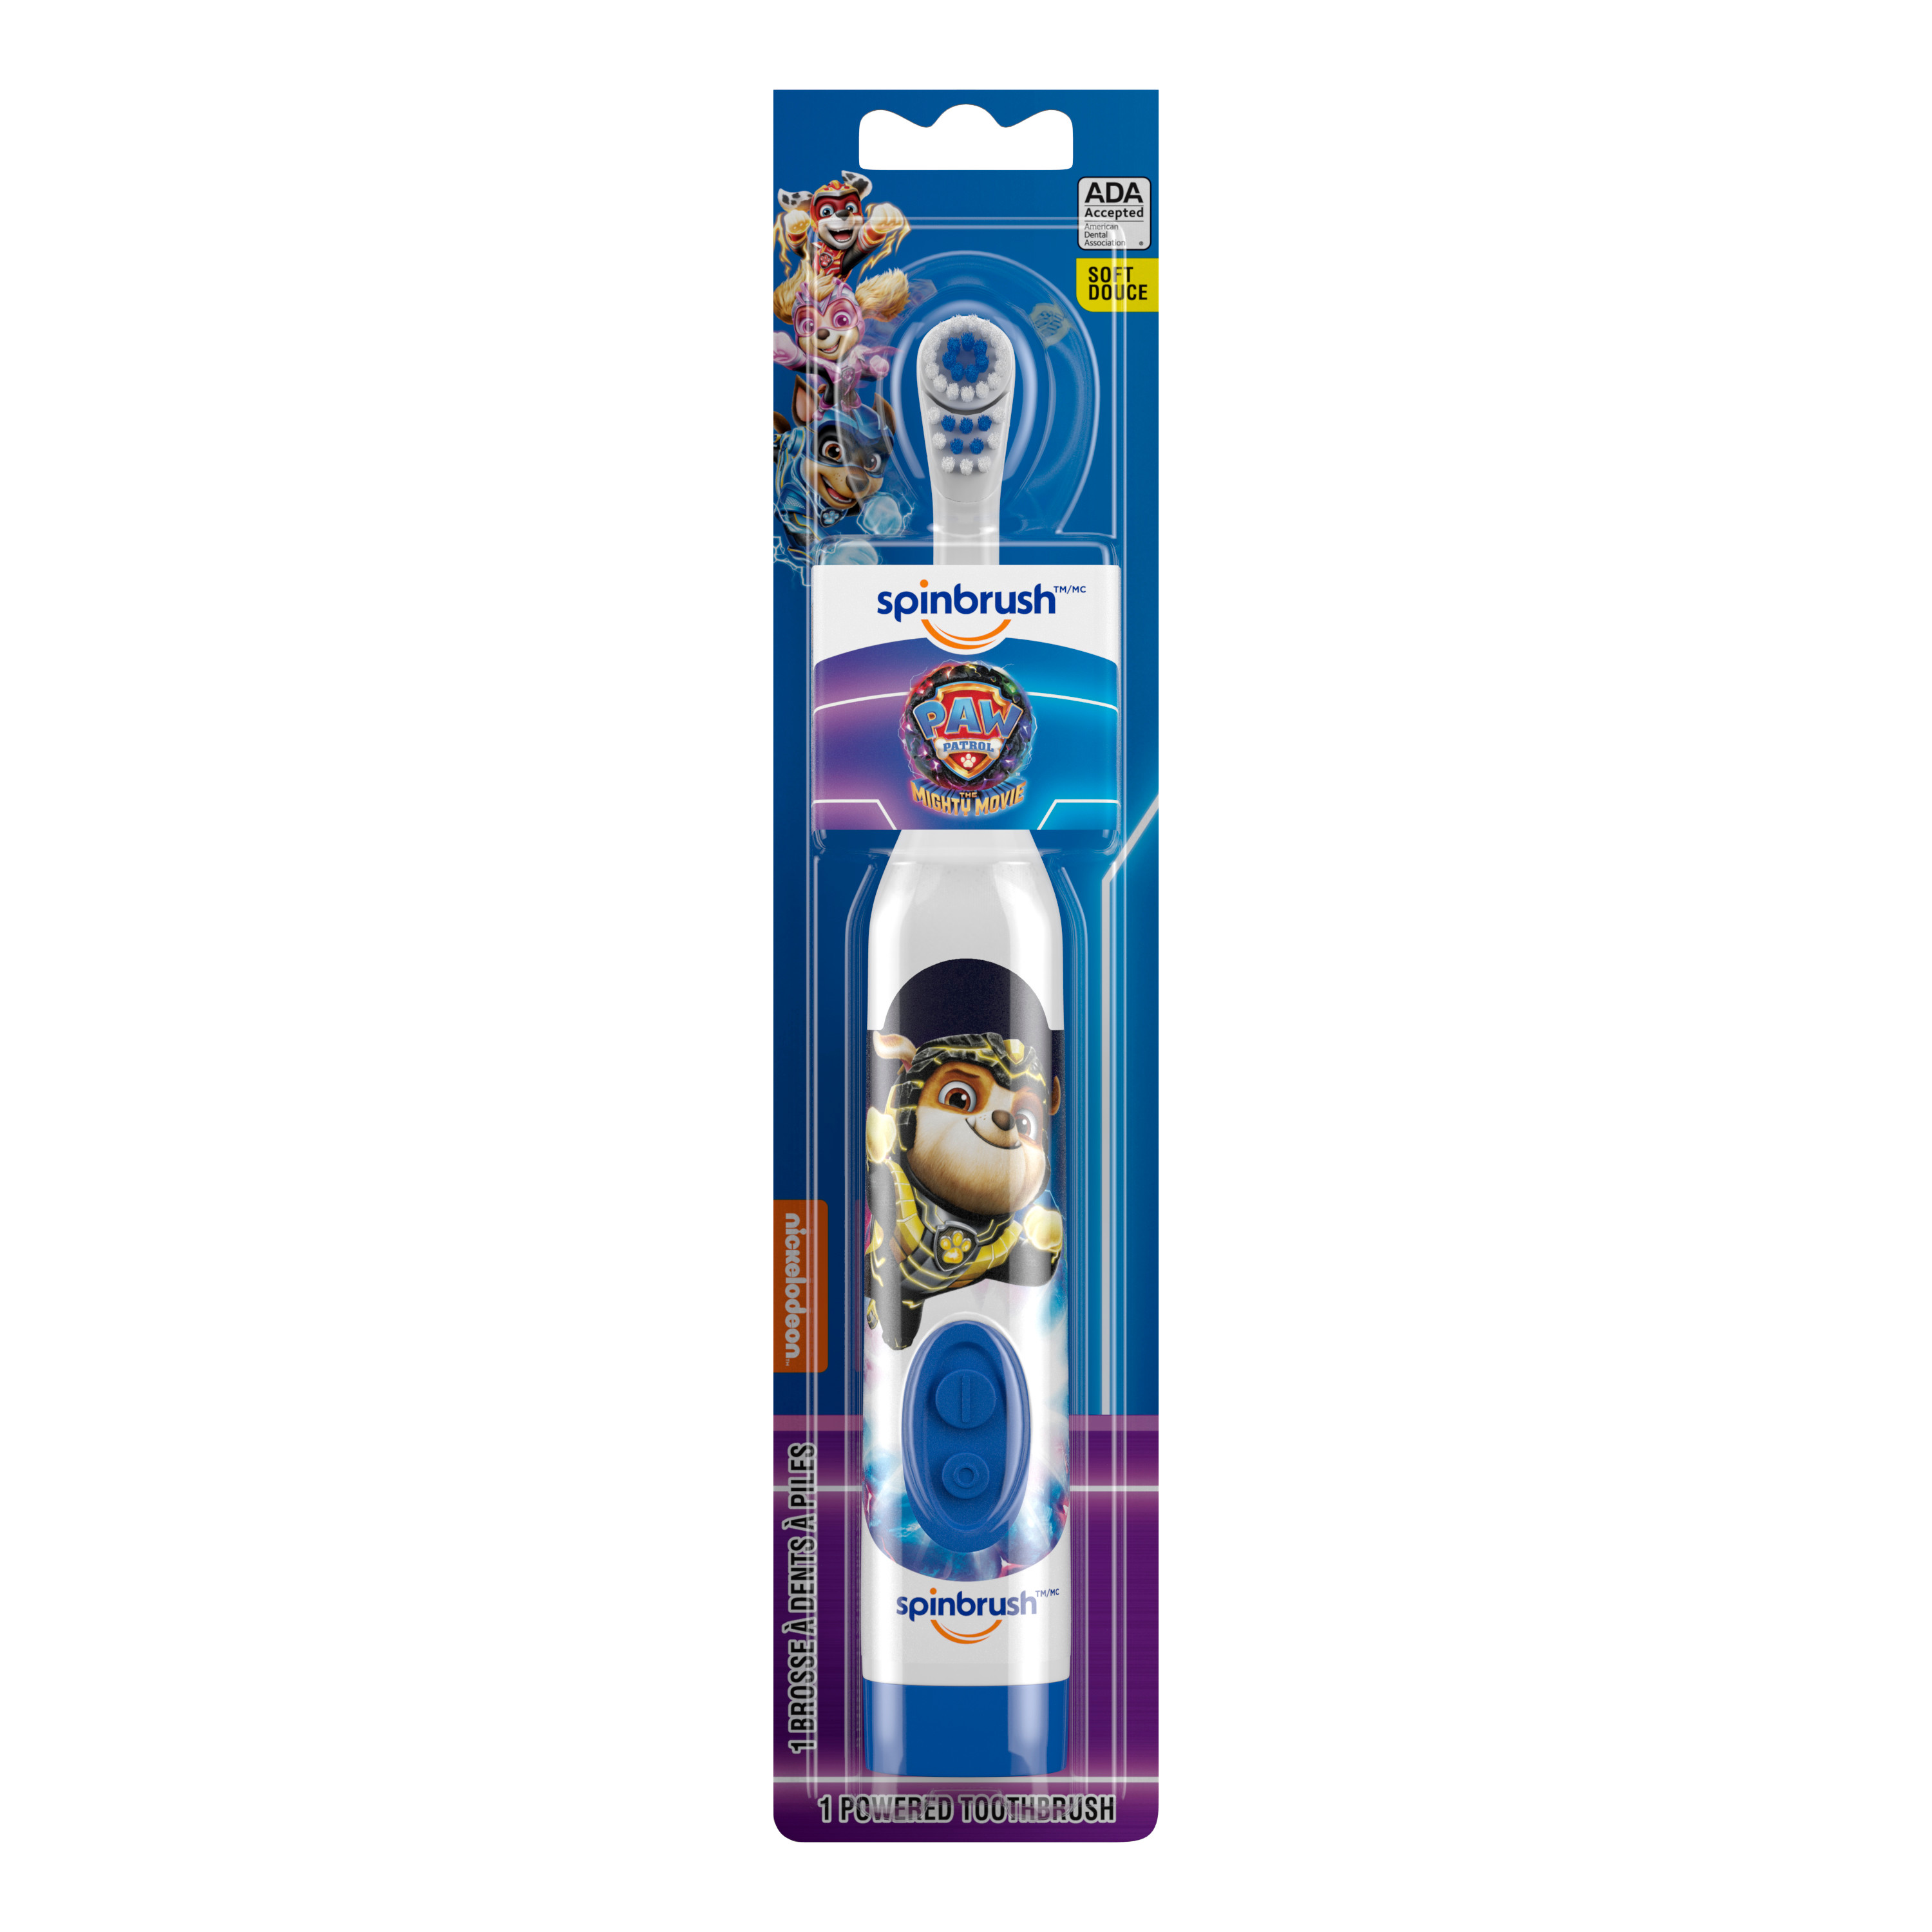 PAW Patrol Spinbrush Kids Battery-Powered Toothbrush, Soft Bristles, Ages 3+, Character May Vary - image 3 of 7